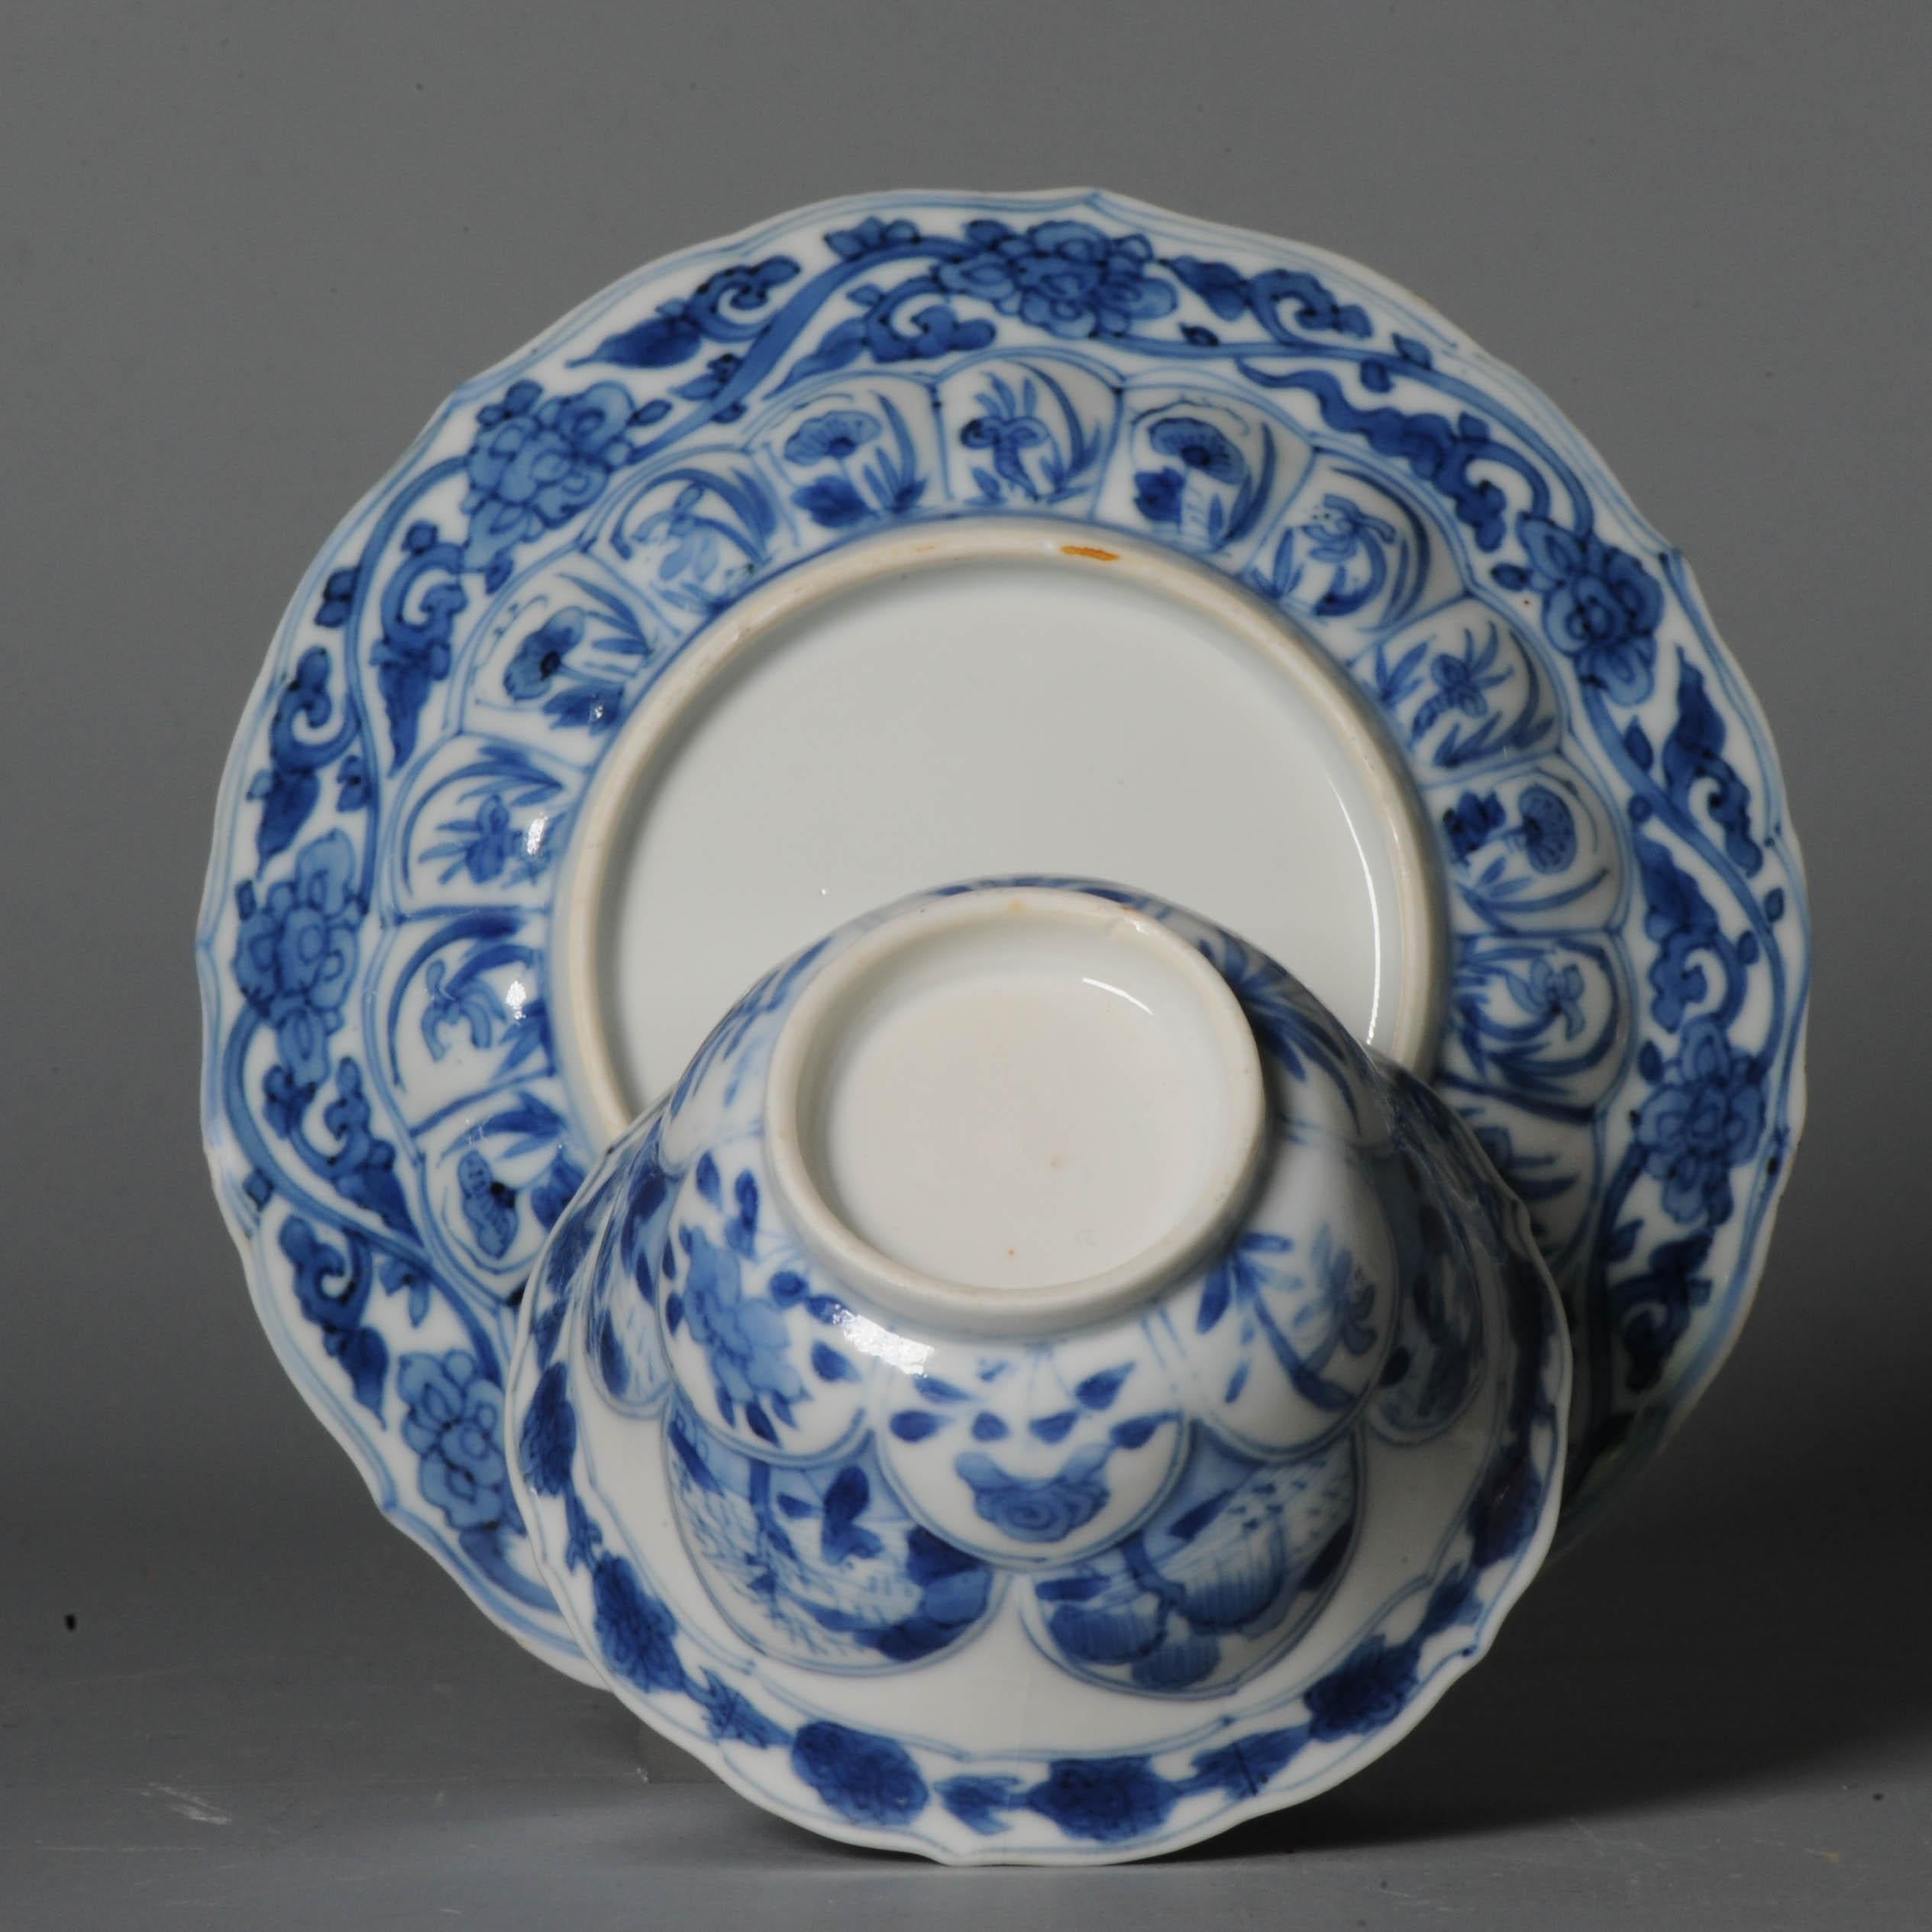 Chinese Export Porcelain Blue and White Lotus-Moulded 'Acupuncture' 7